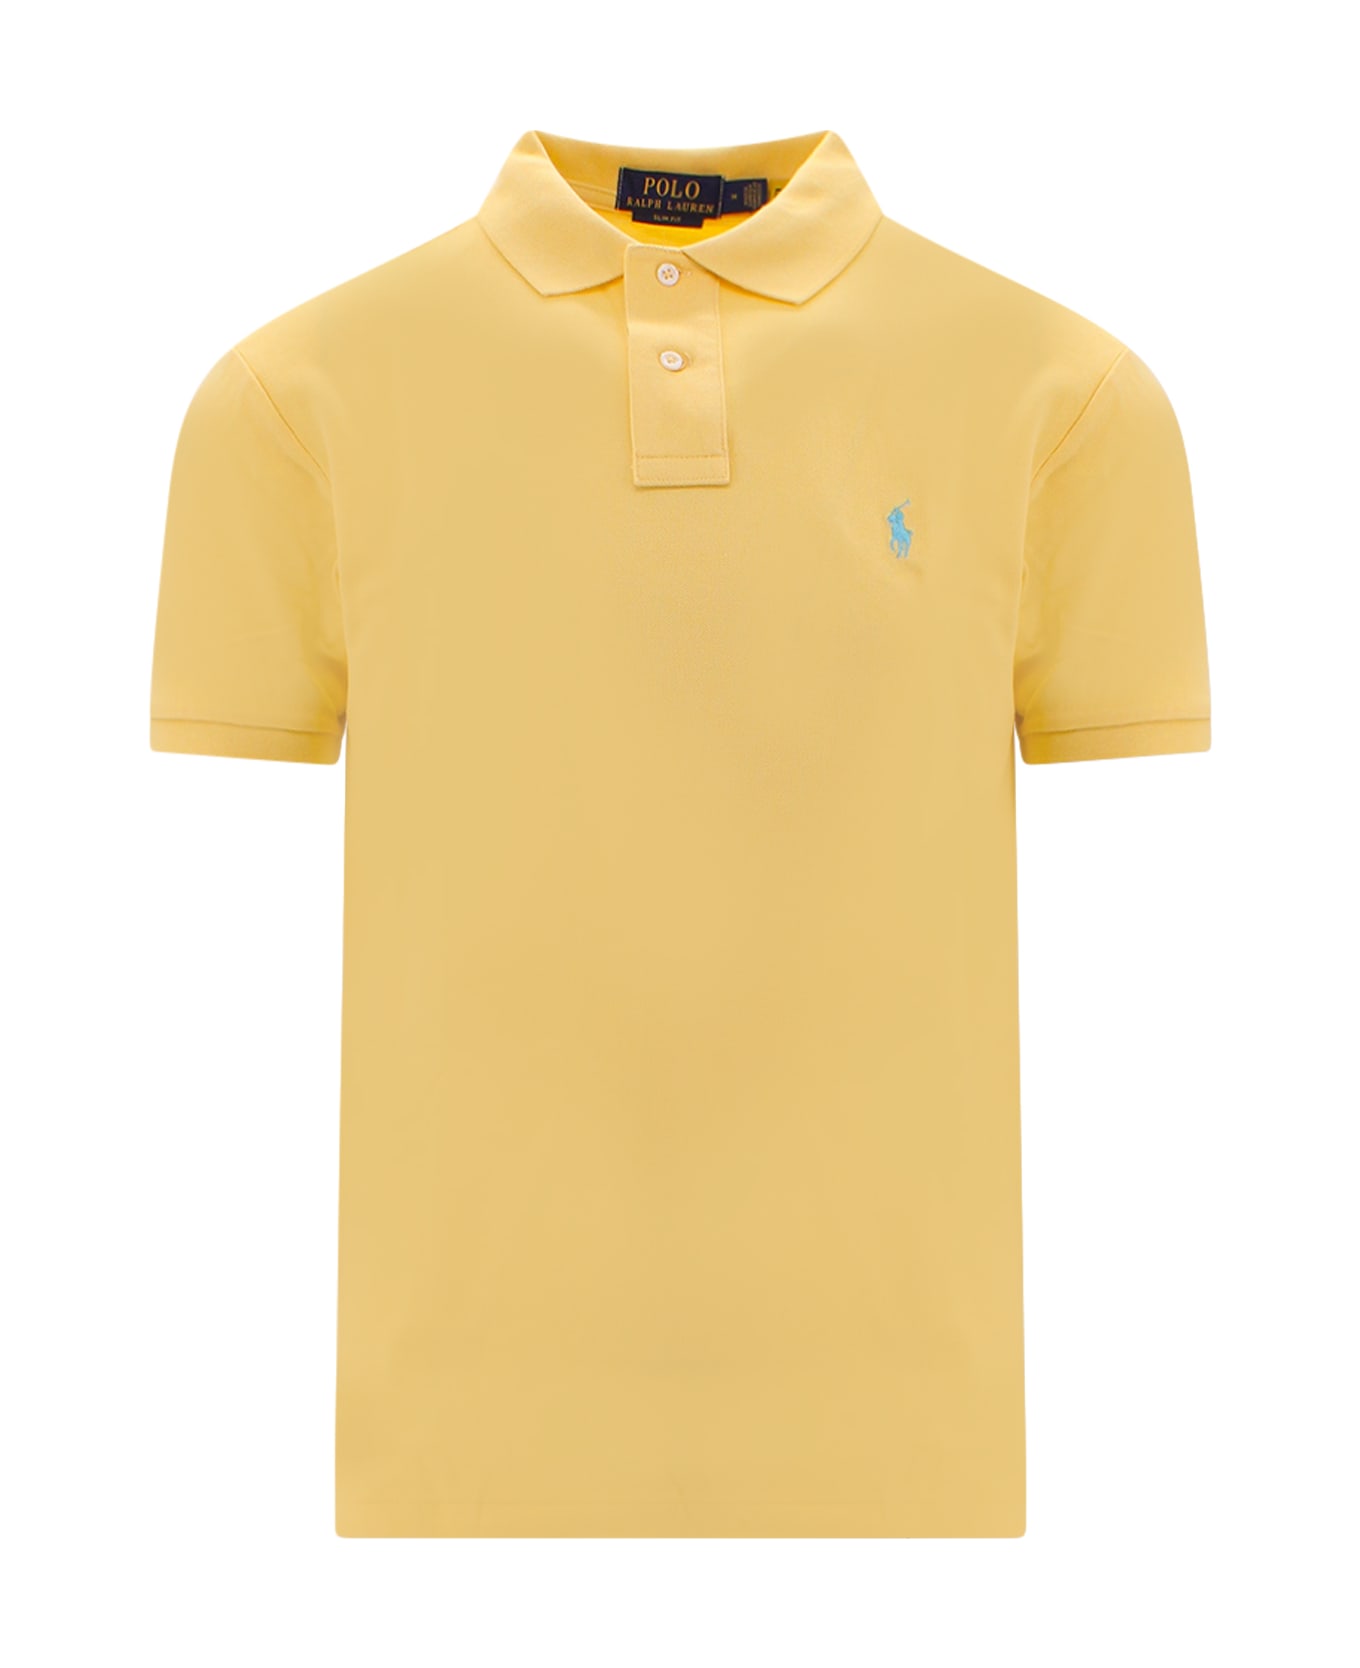 Polo Ralph Lauren Yellow And Light Blue Slim-fit Pique Polo Shirt - Yellow